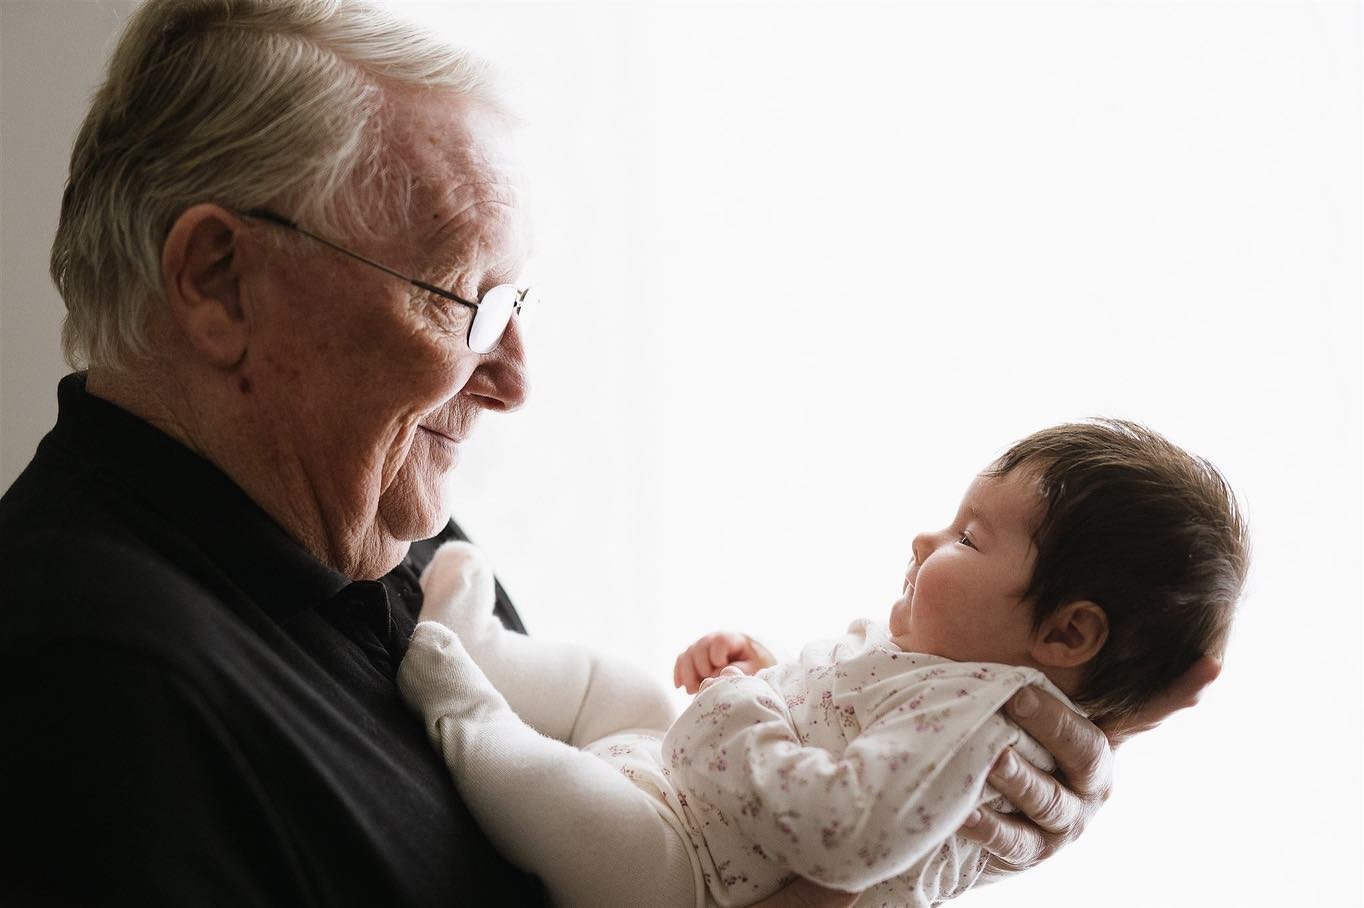 Swipe ⬅️ to see the cutest great-granddad moment in the whole entire world 😍